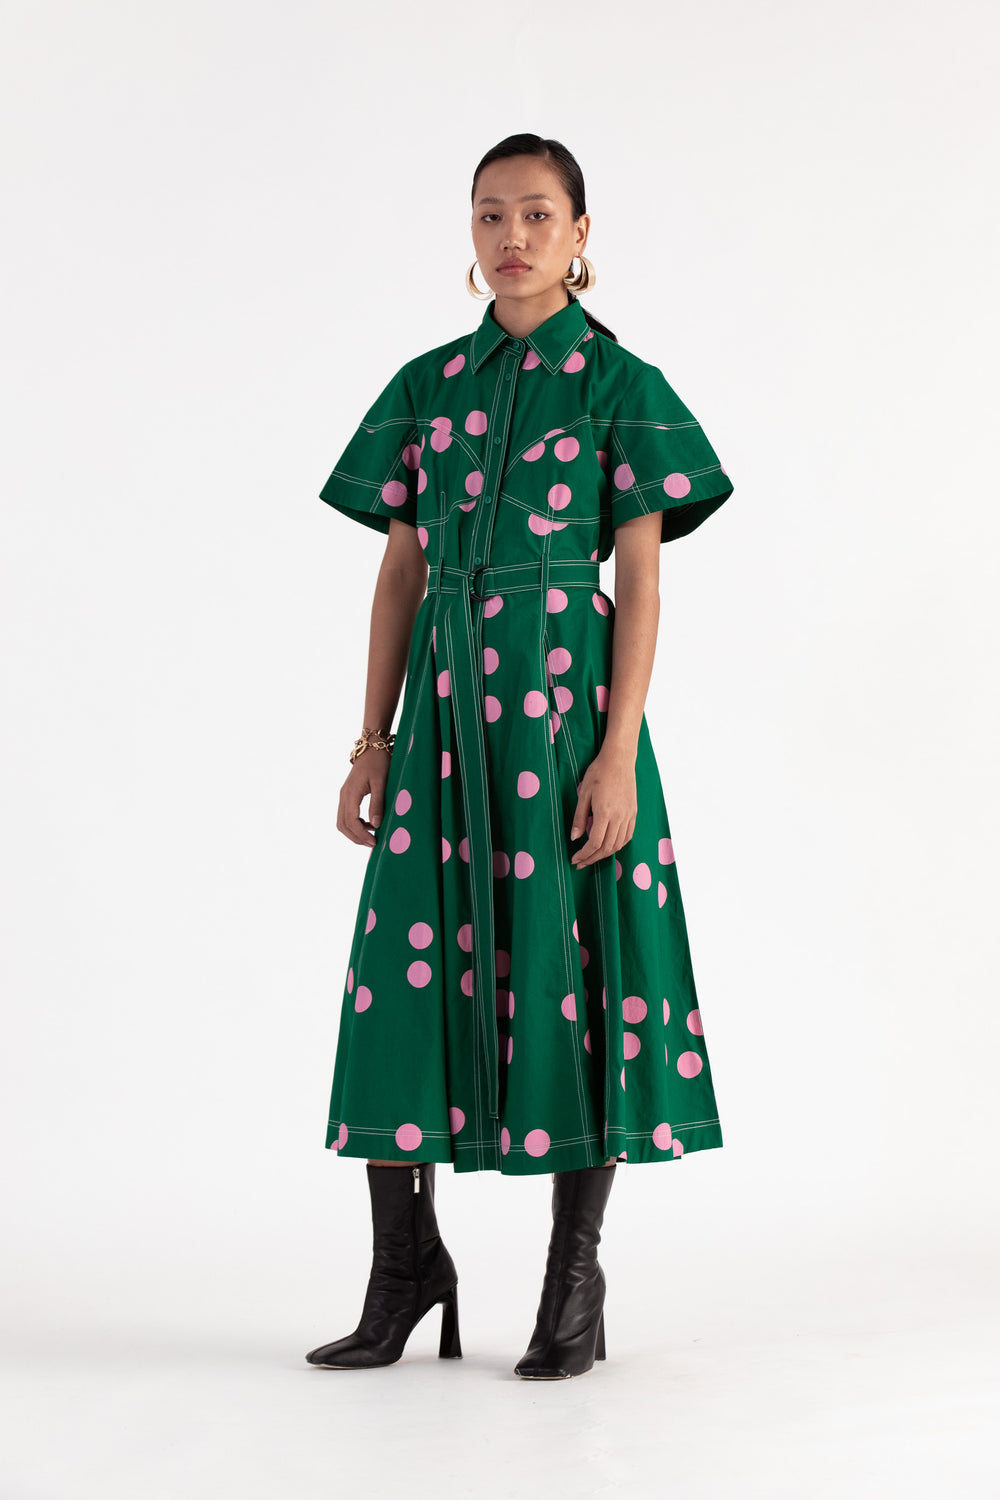 ☆ Pre-Order ☆ Australian Birds and Blooms Lifestyle Dress – Z